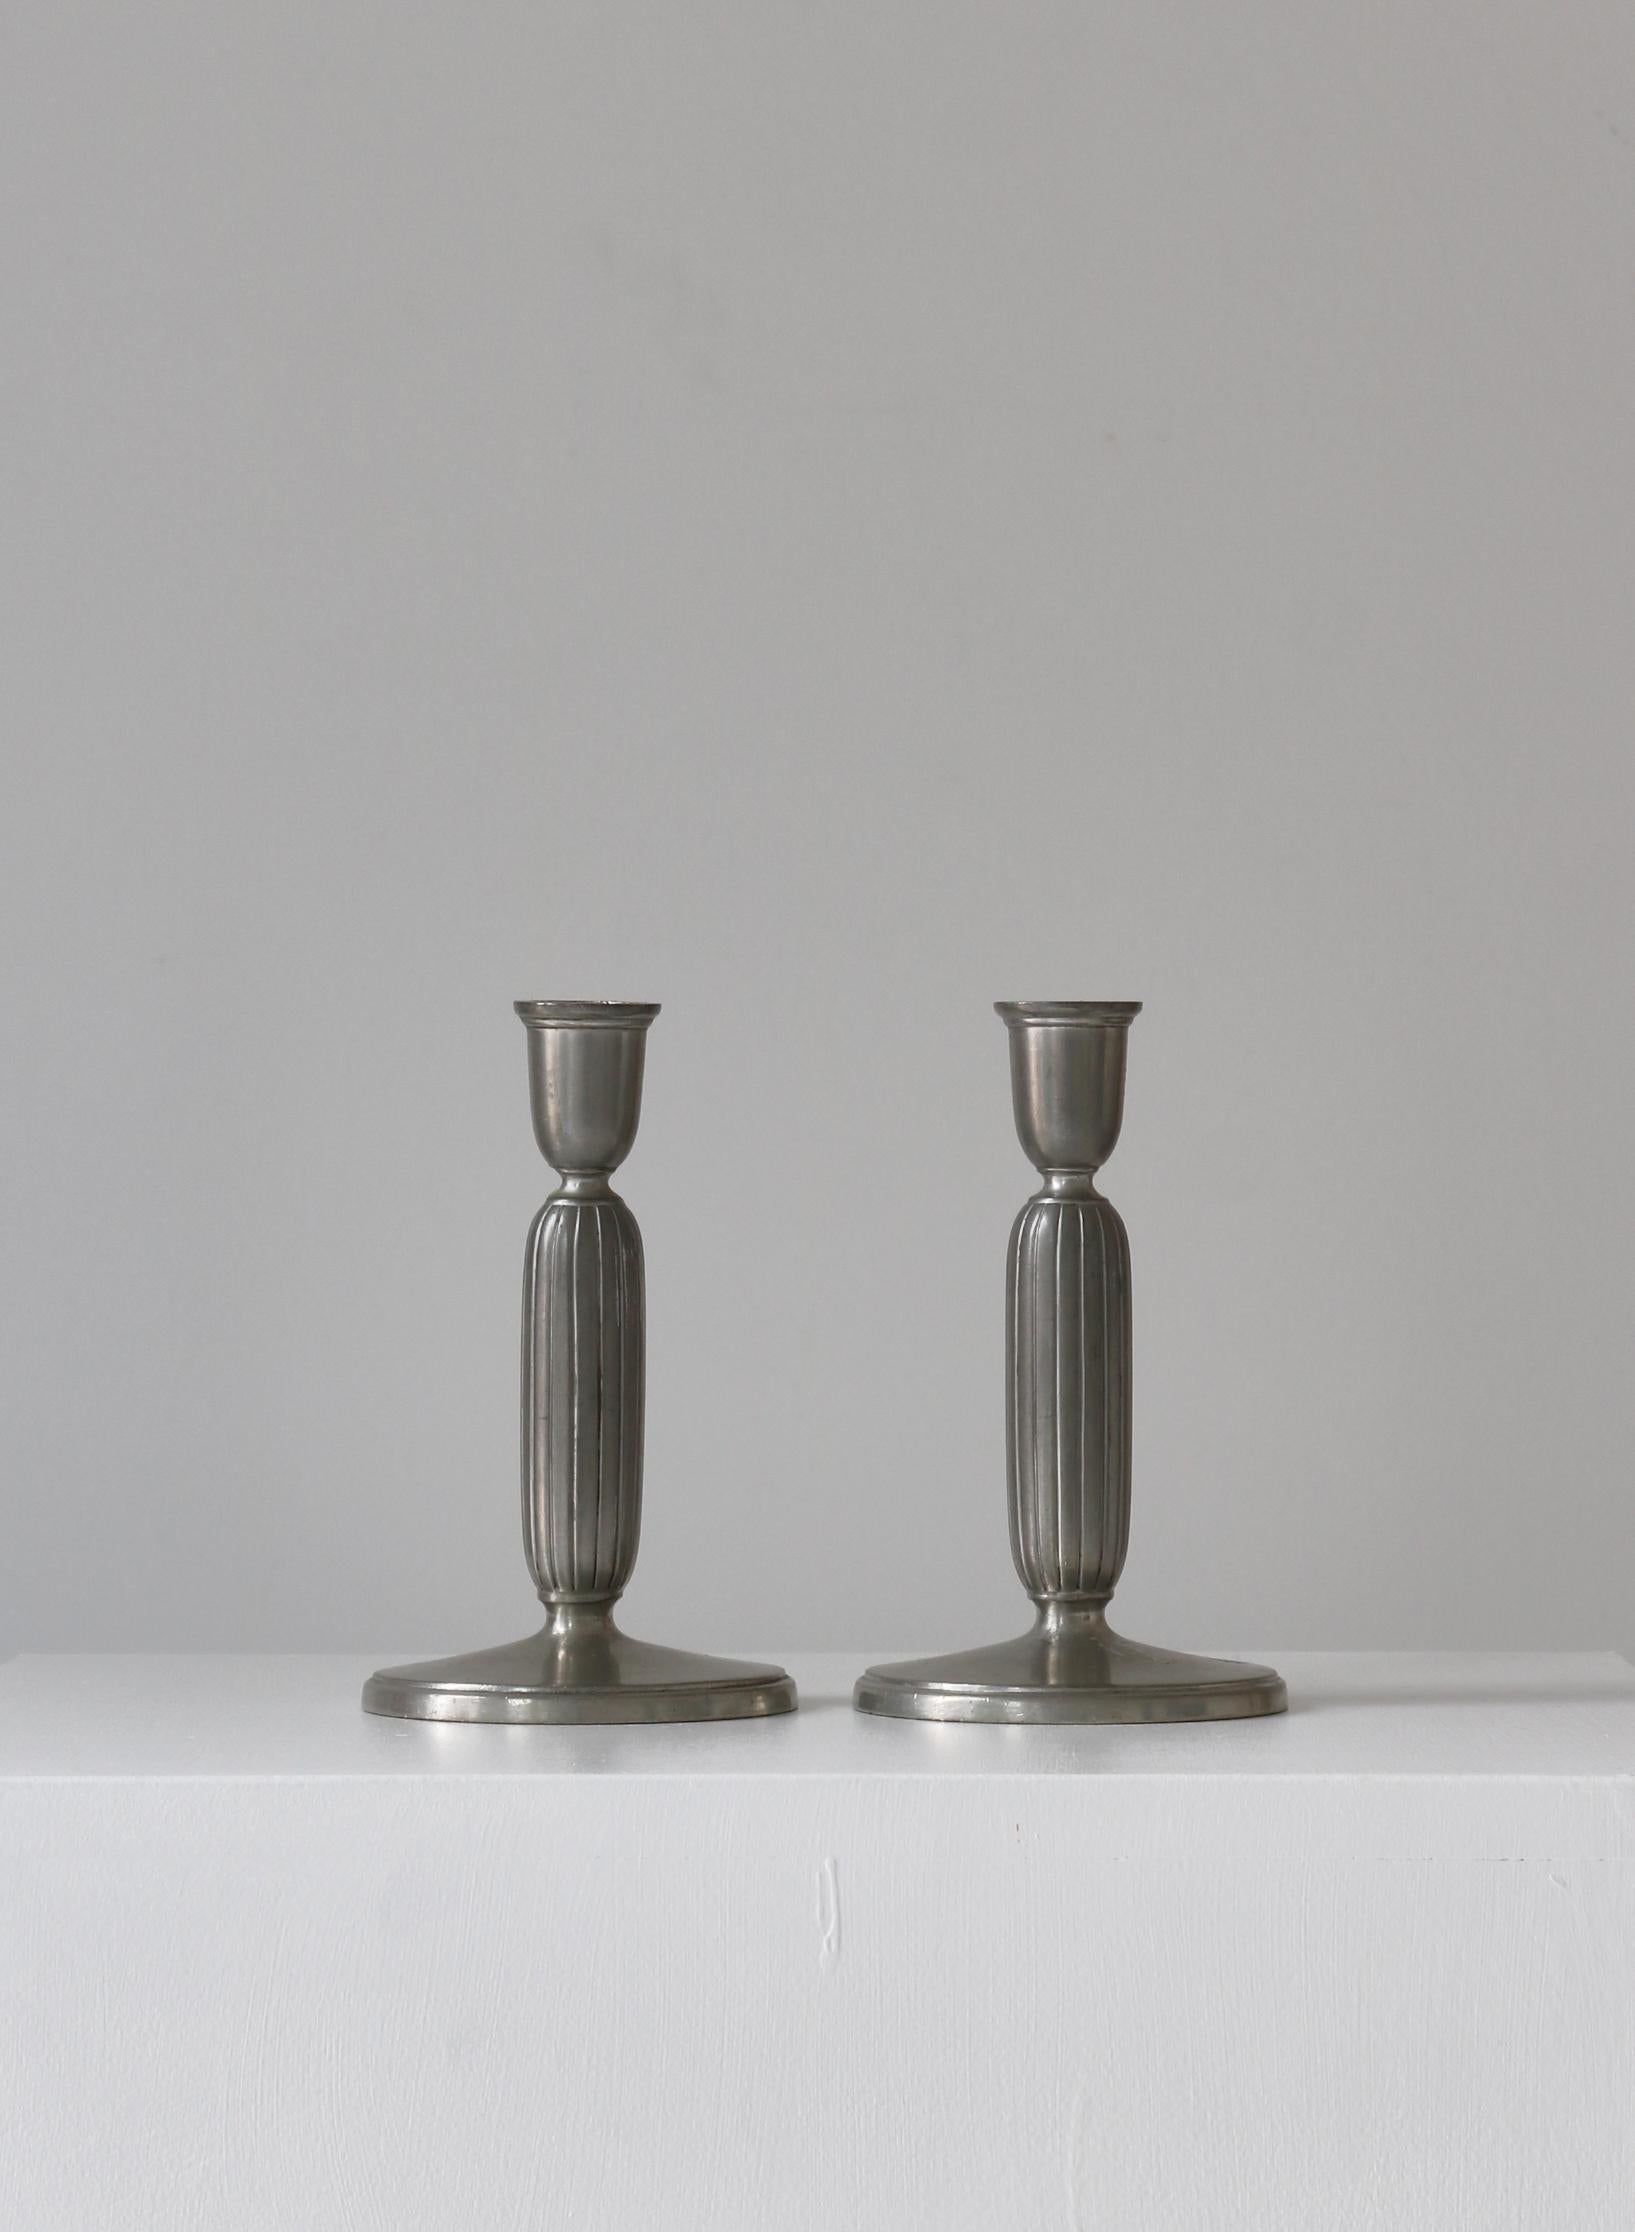 Beautiful set of Art Deco candlesticks in pewter by Just Andersen made at his own workshop in the 1920-30s. Both pieces are stamped with Just Andersen logo and model no. 2574.

Just Andersen was a Danish designer and sculptor who played a